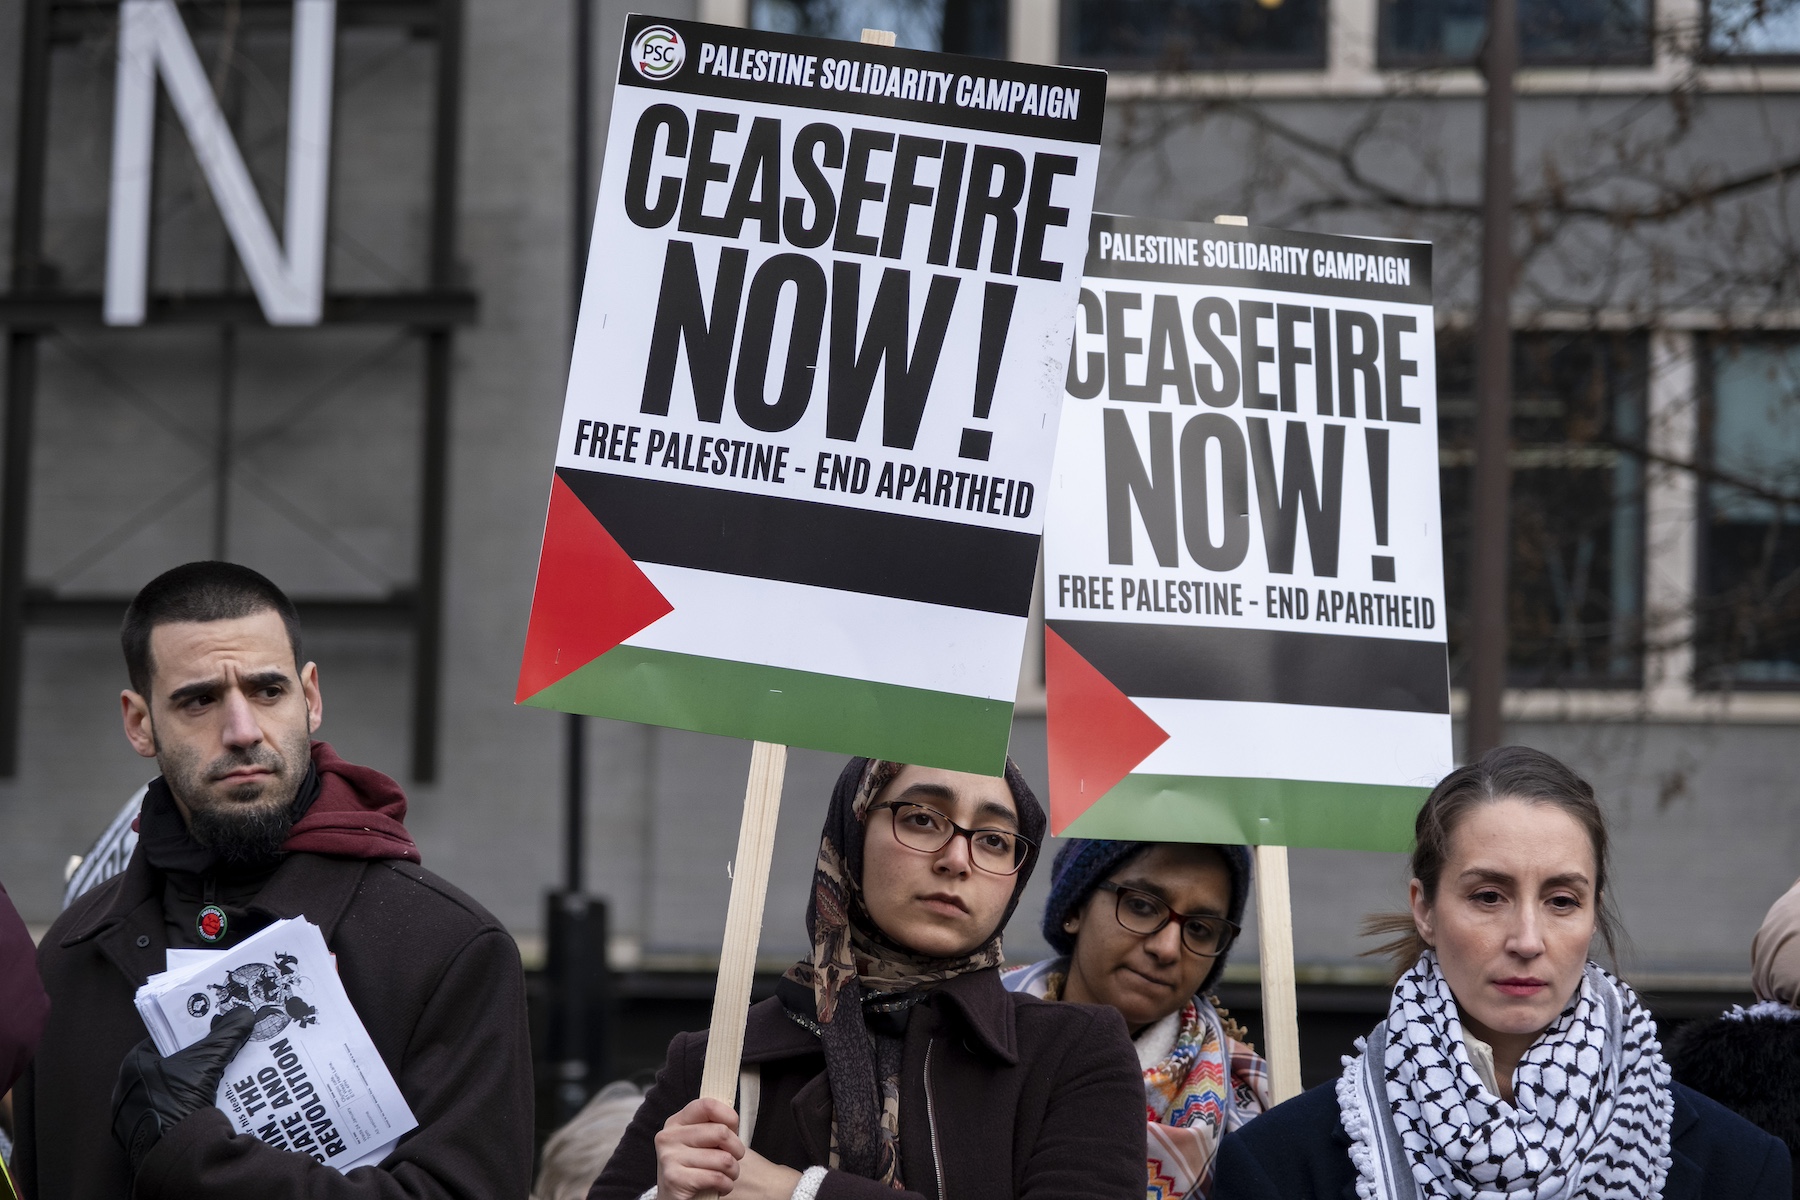 protesters gathered in Whitechapel call for peace and a ceasefire Gaza